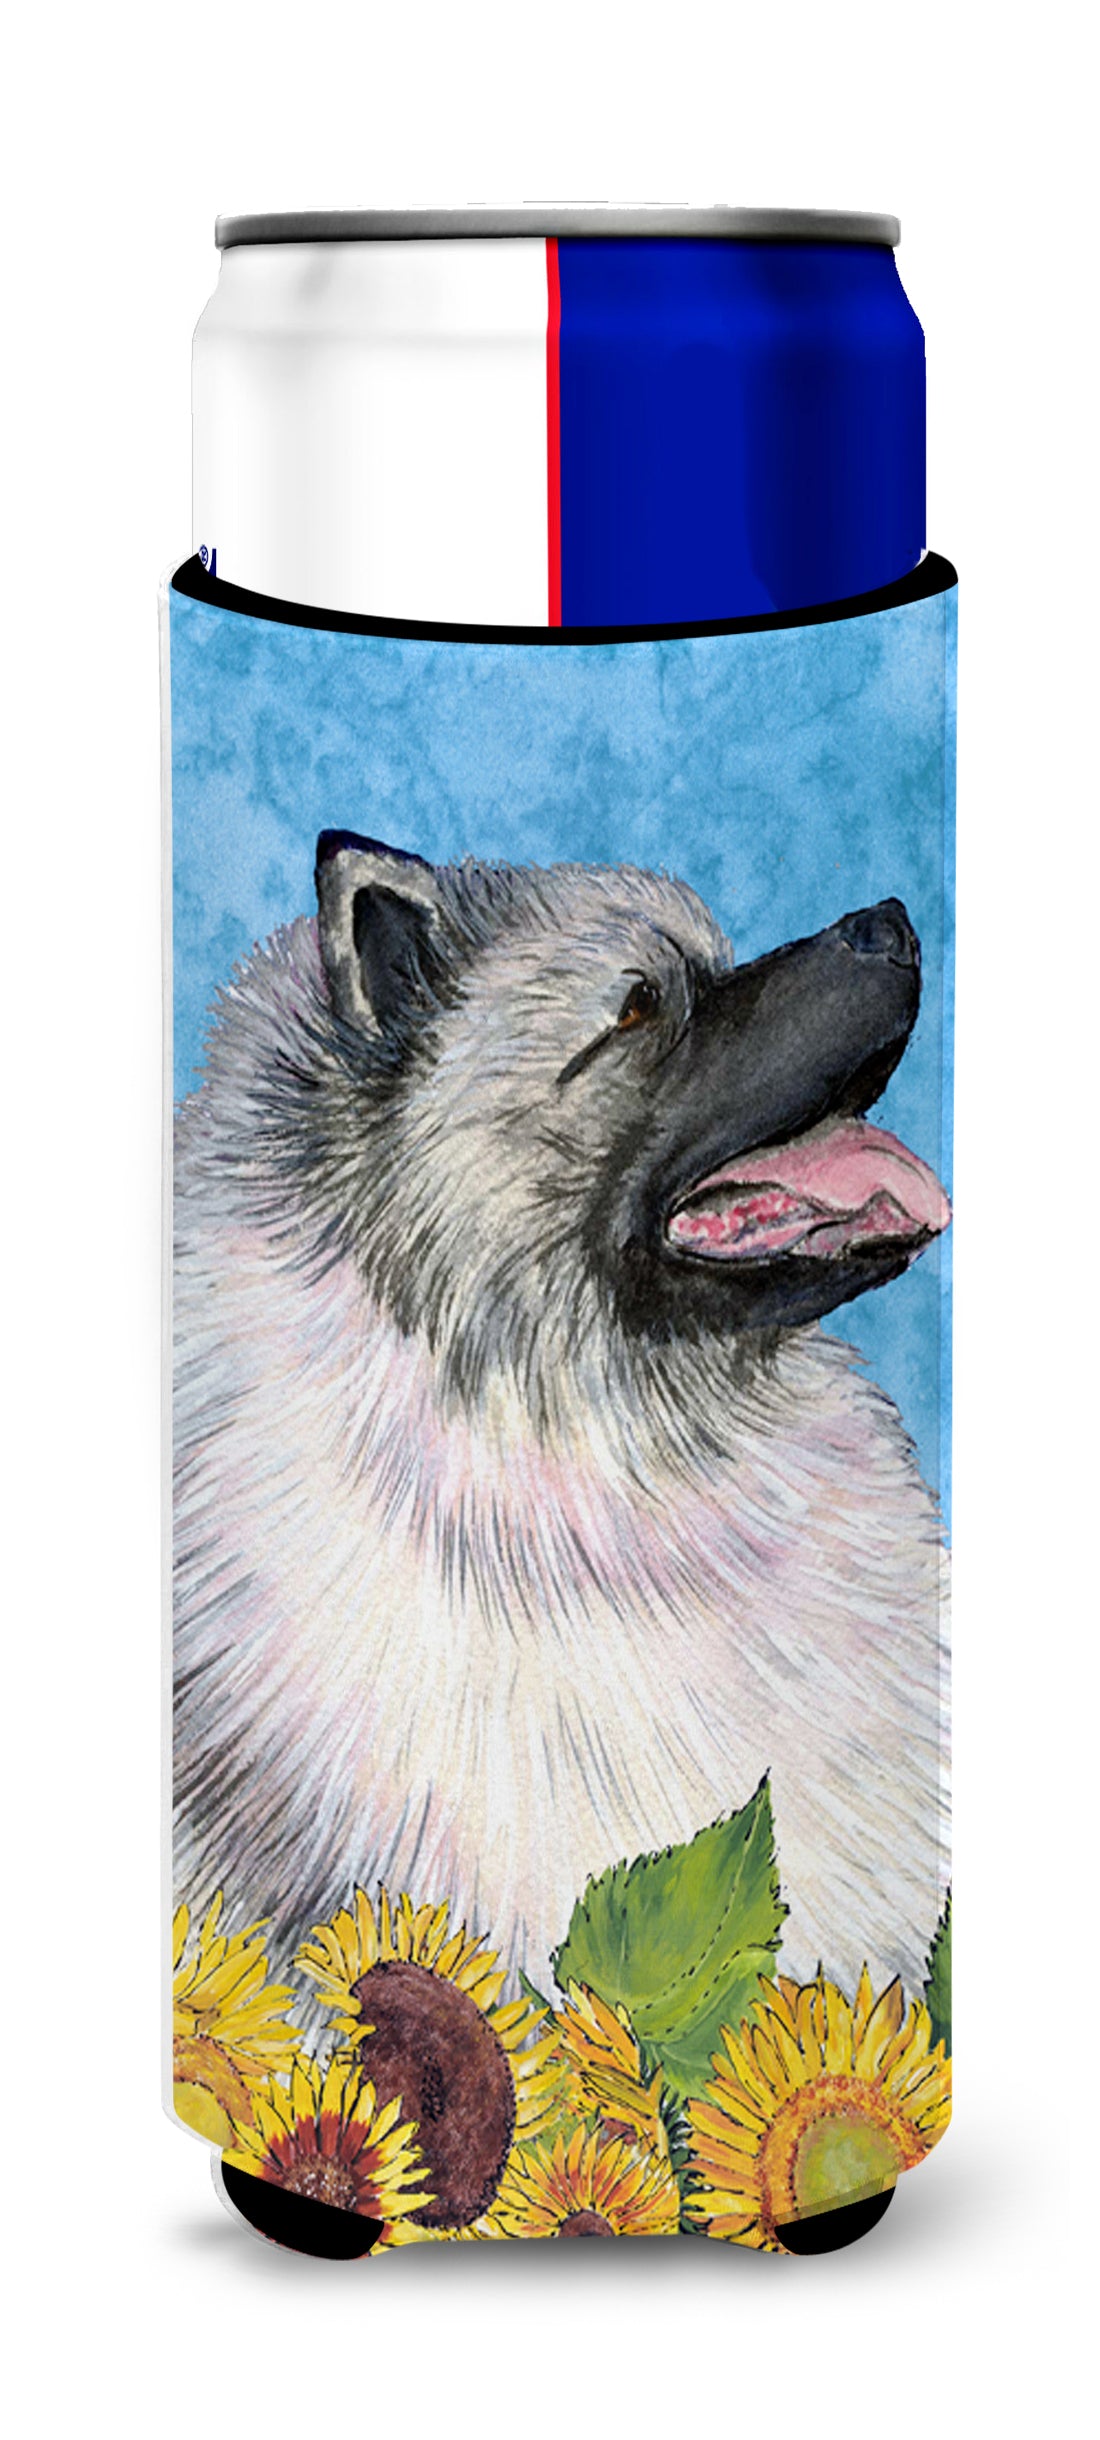 Keeshond in Summer Flowers Ultra Beverage Insulators for slim cans SS4122MUK.